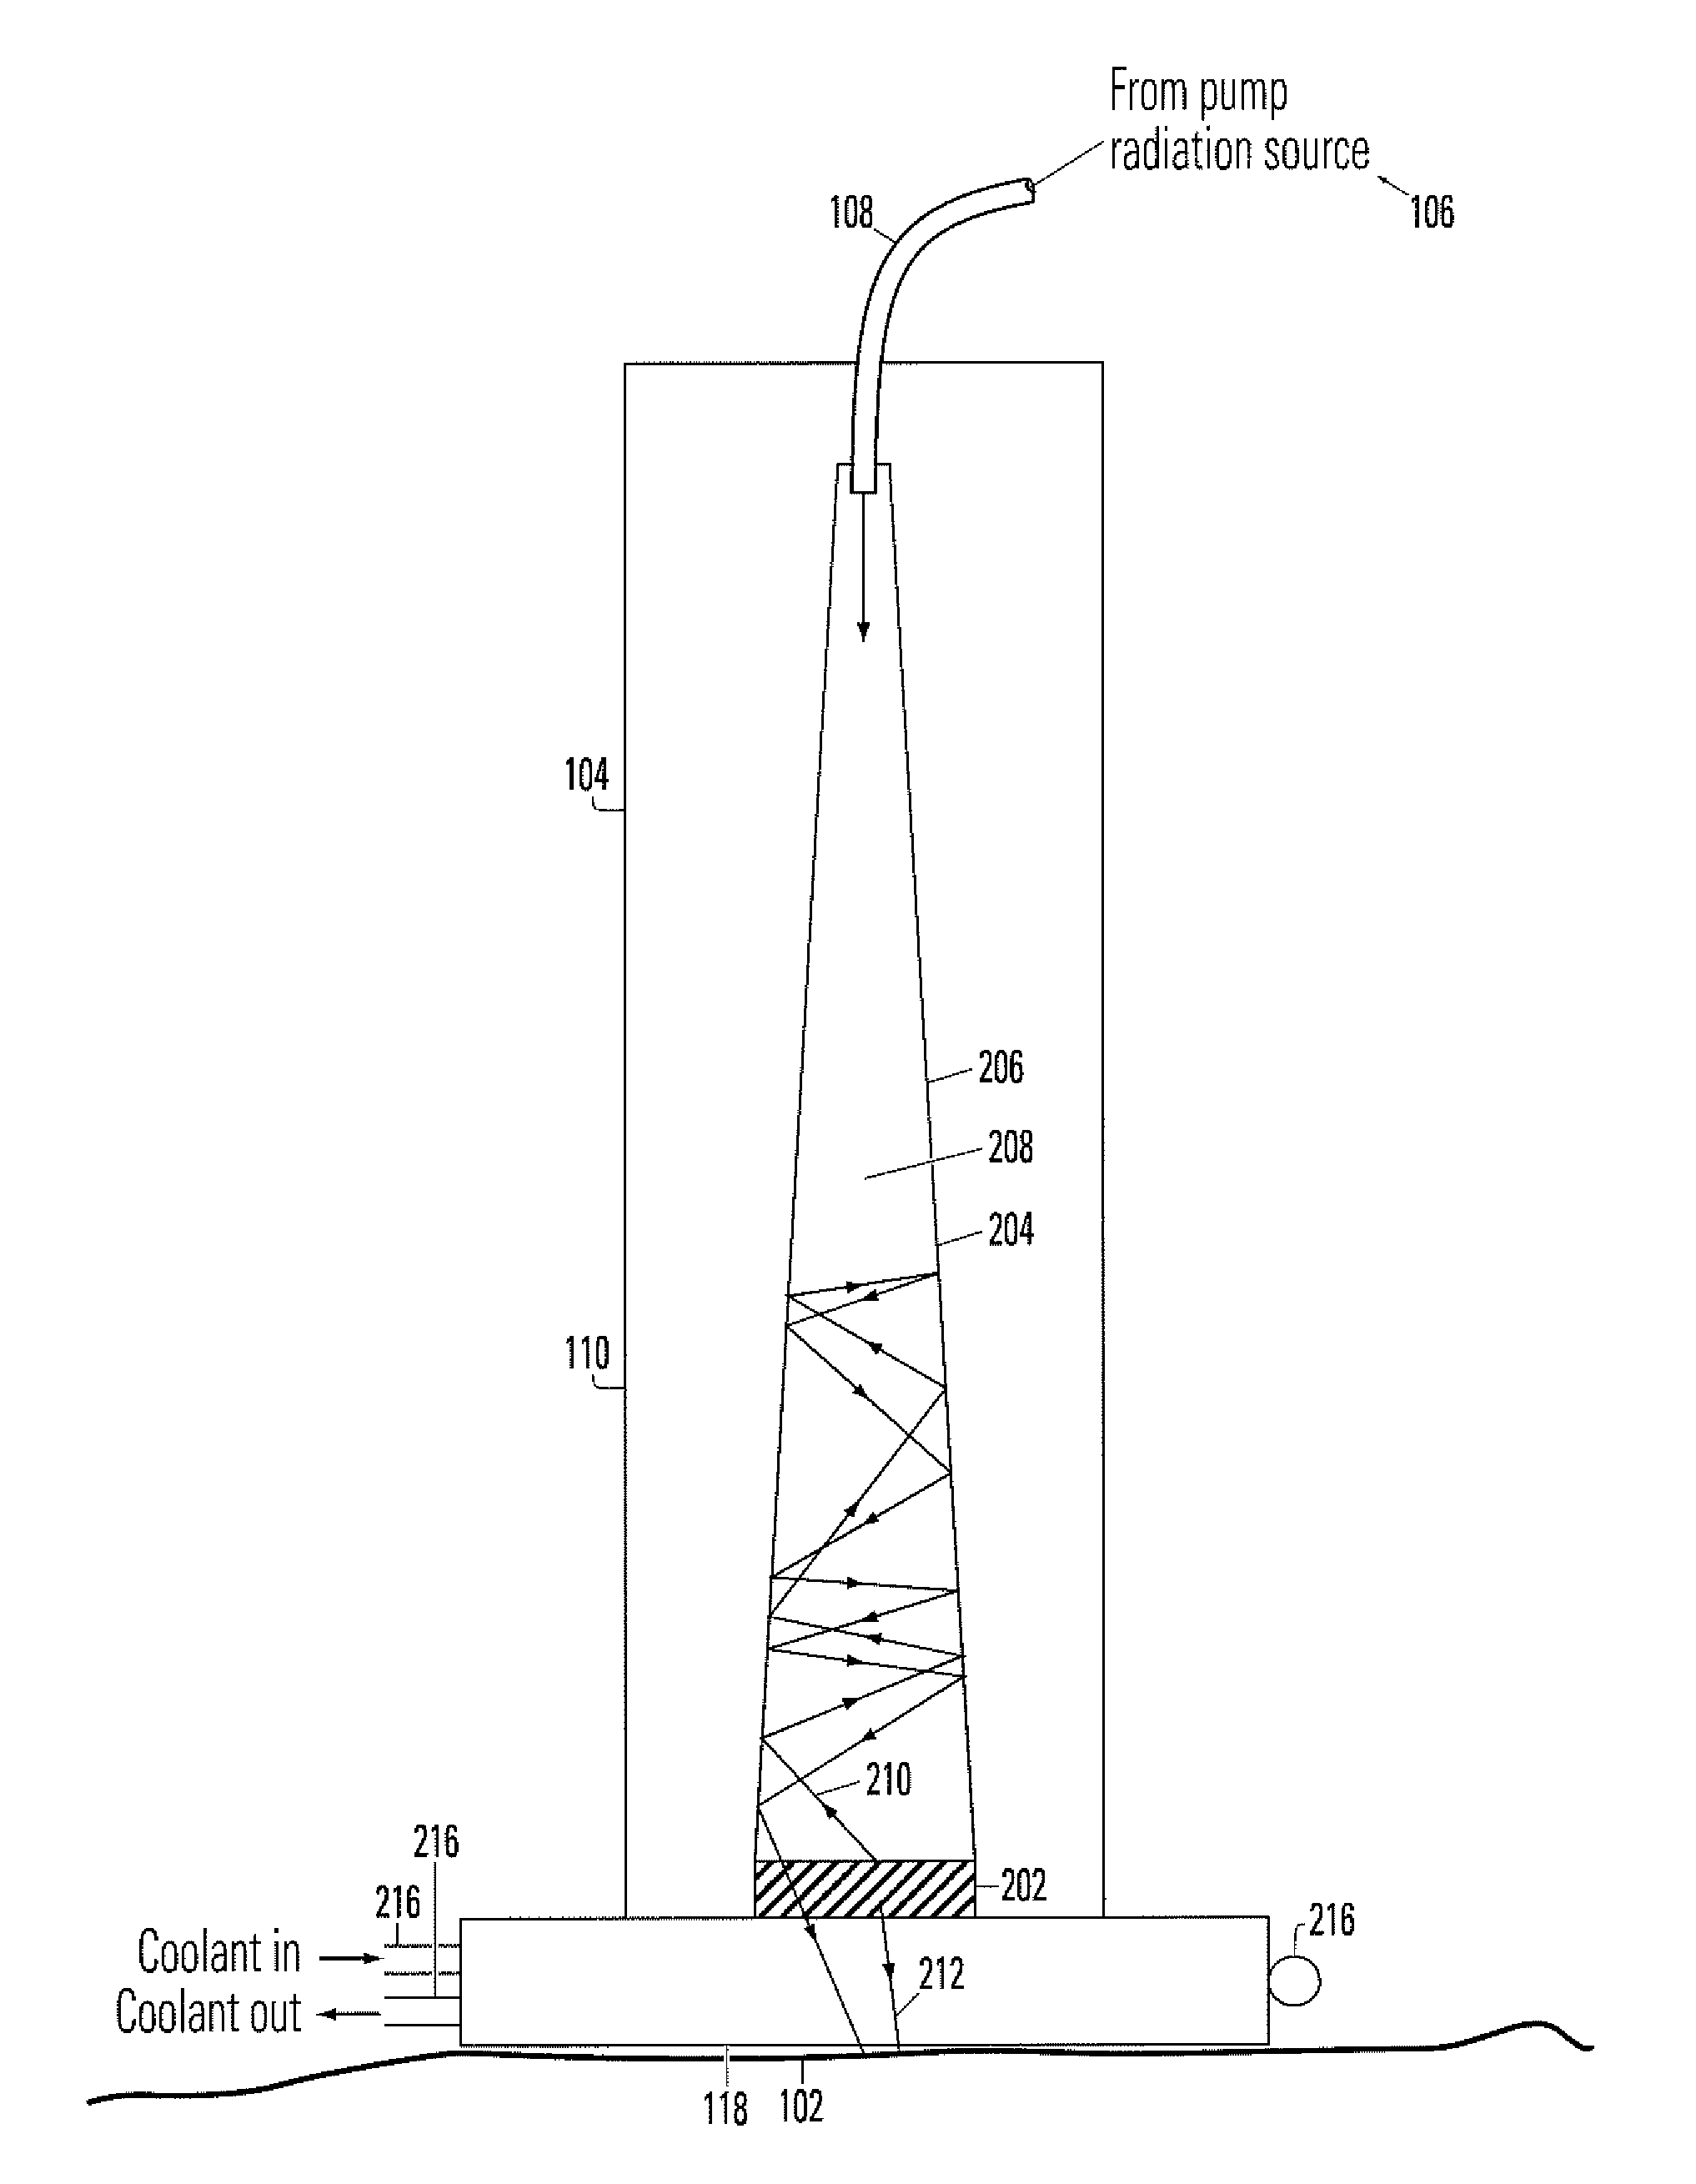 Device for irradiating tissue